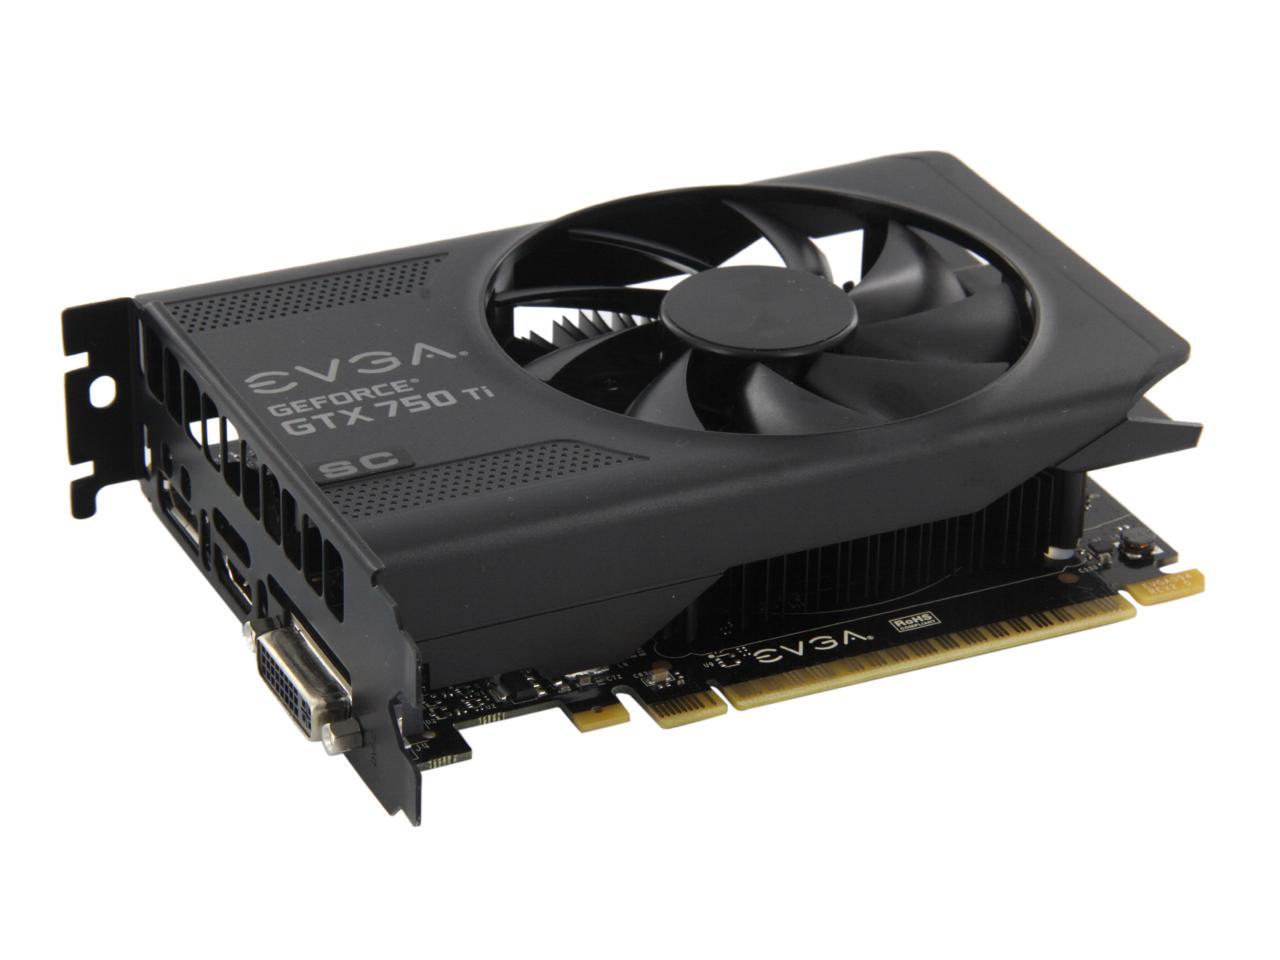 Understand And Buy Evga Gtx 750 Ti Specs Cheap Online